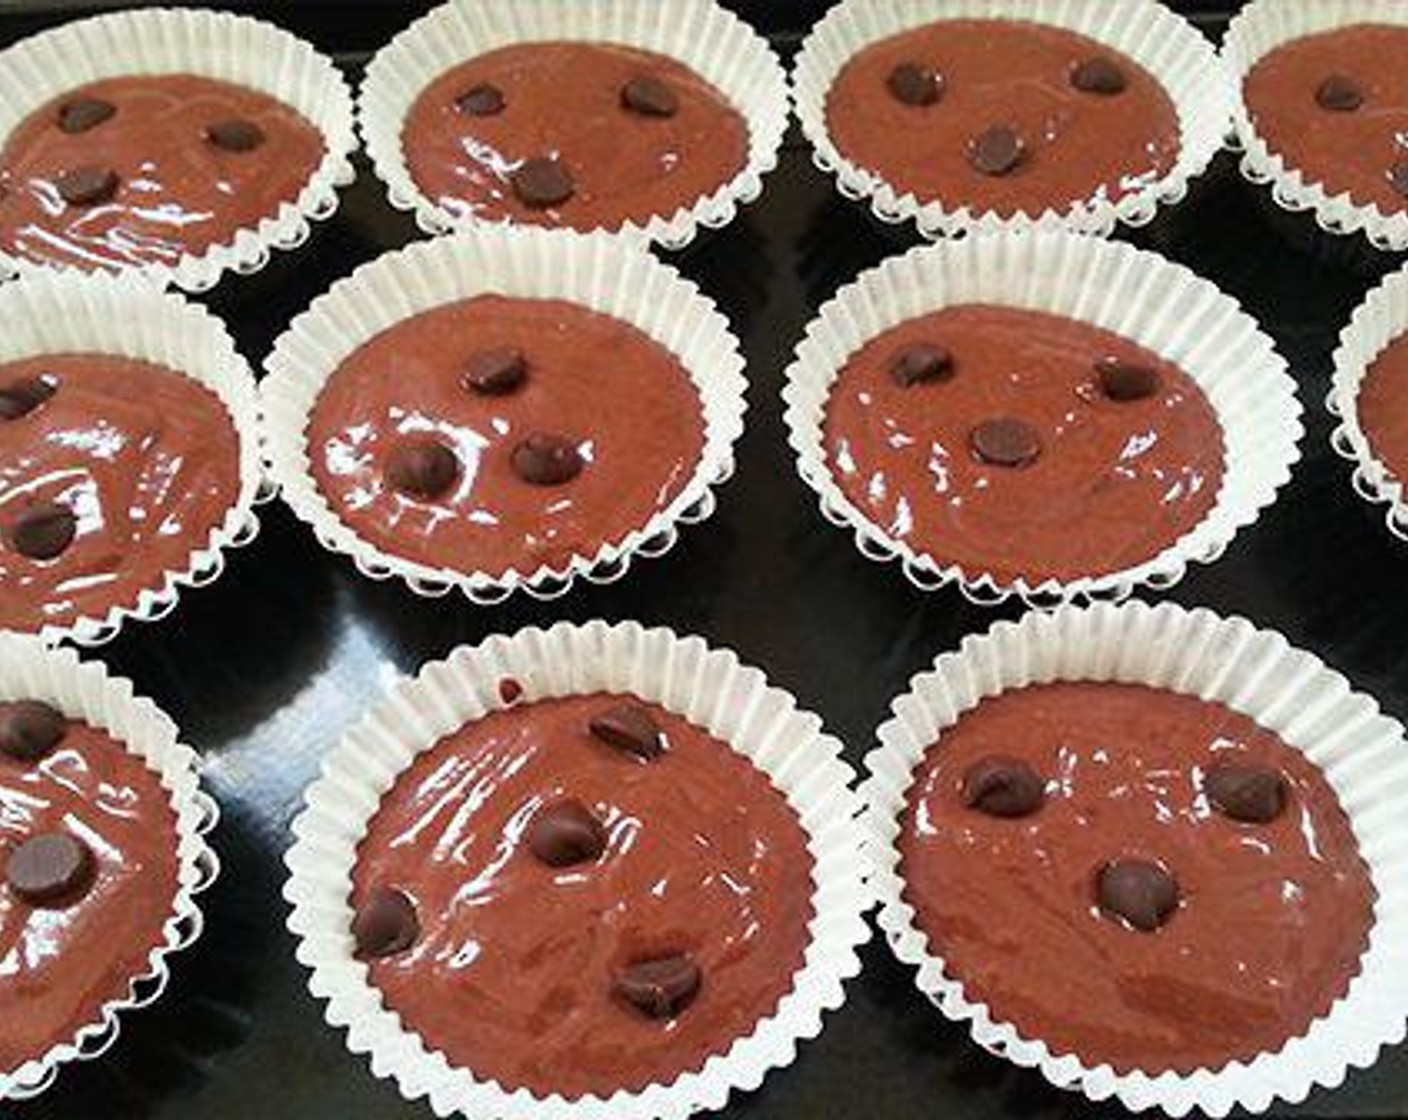 step 4 Add Chocolate Chips (1/2 cup). Fold in the chocolate chips into the batter. Grease the muffin tray or line it with paper liner. I have used individual muffin cups. Fill the cups three fourths with the batter and sprinkle few chocolate chips on top.